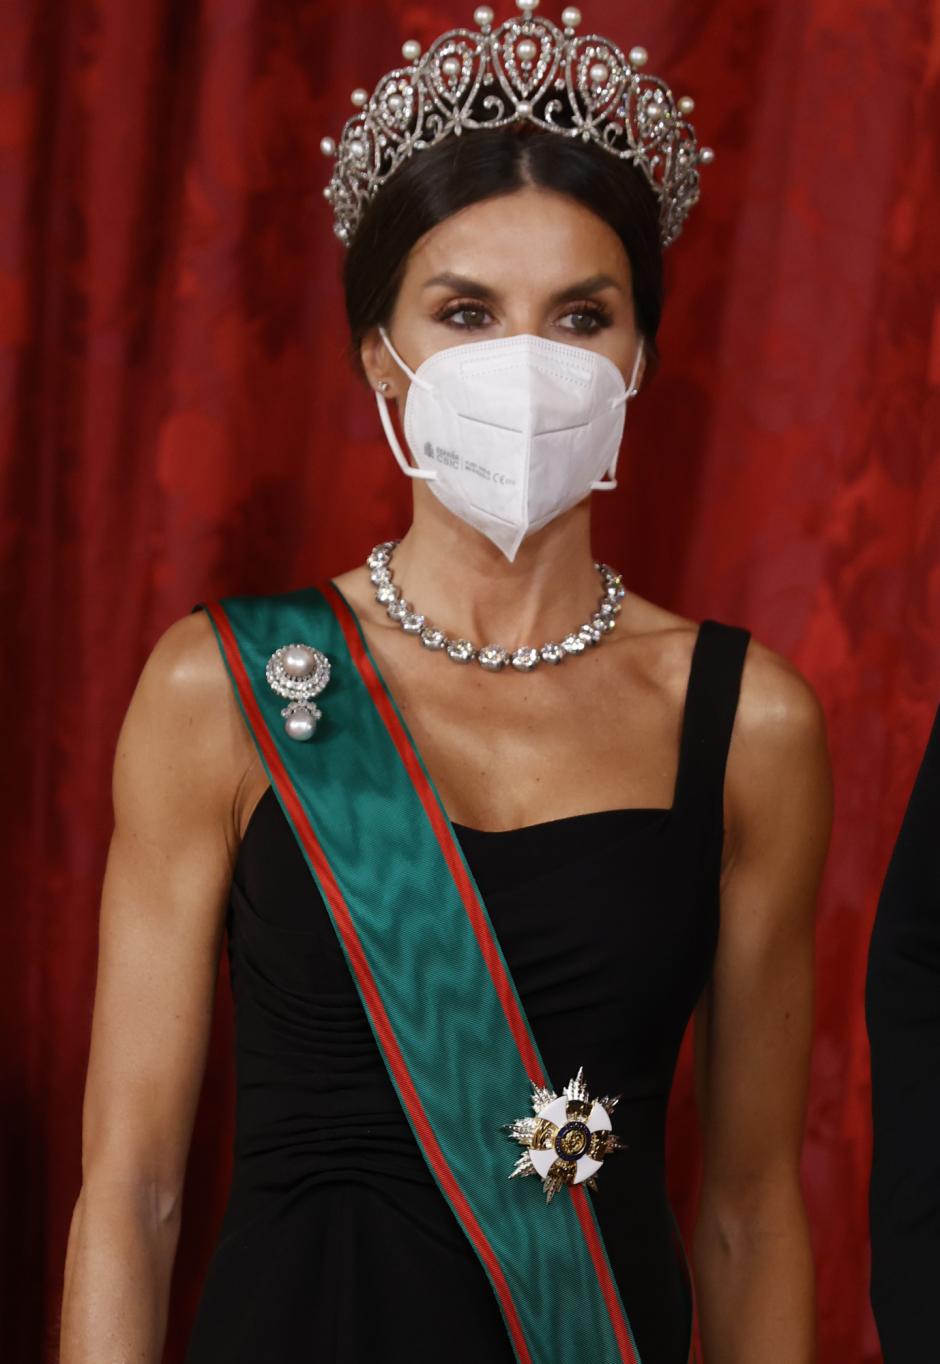 Queen Letizia Ortiz during a gala dinner at the RoyalPalace, in Madrid, due to the official trip of Italy President to Spain, in Madrid on Tuesday16 November 2021.